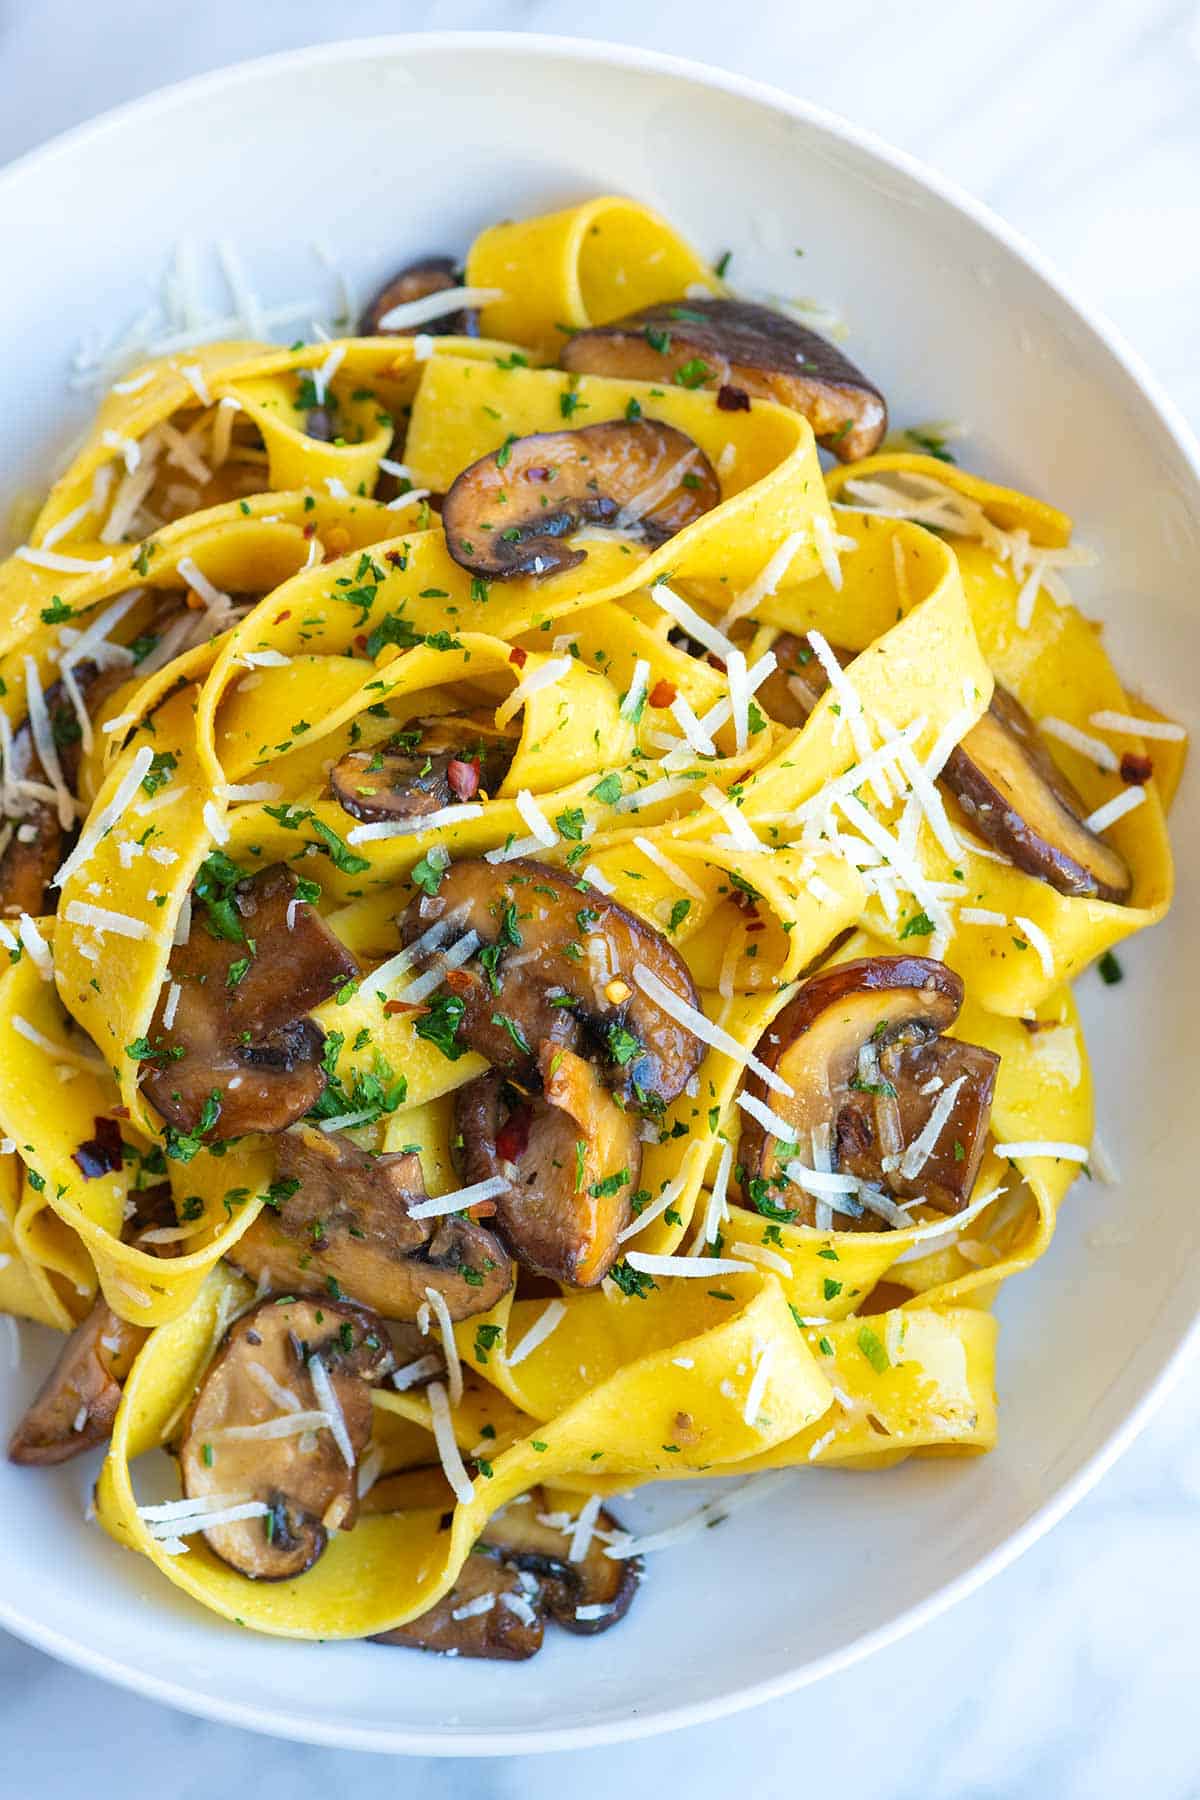 Mushroom pasta recipe with the most delicious garlic butter mushrooms. Thanks to our no-fail method for cooking mushrooms, this easy pasta comes together in under 30 minutes and tastes amazing!